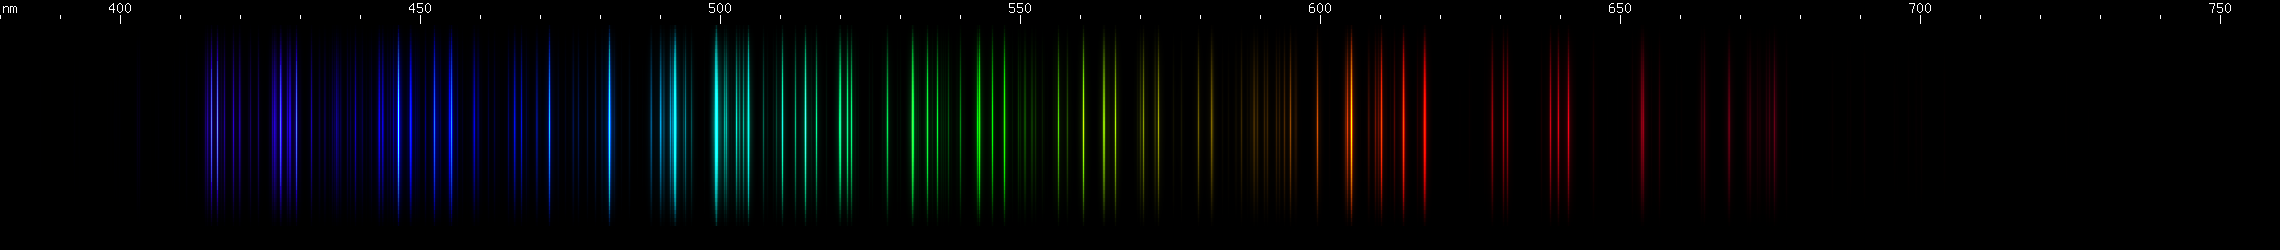 Spectral Lines of Sulfur